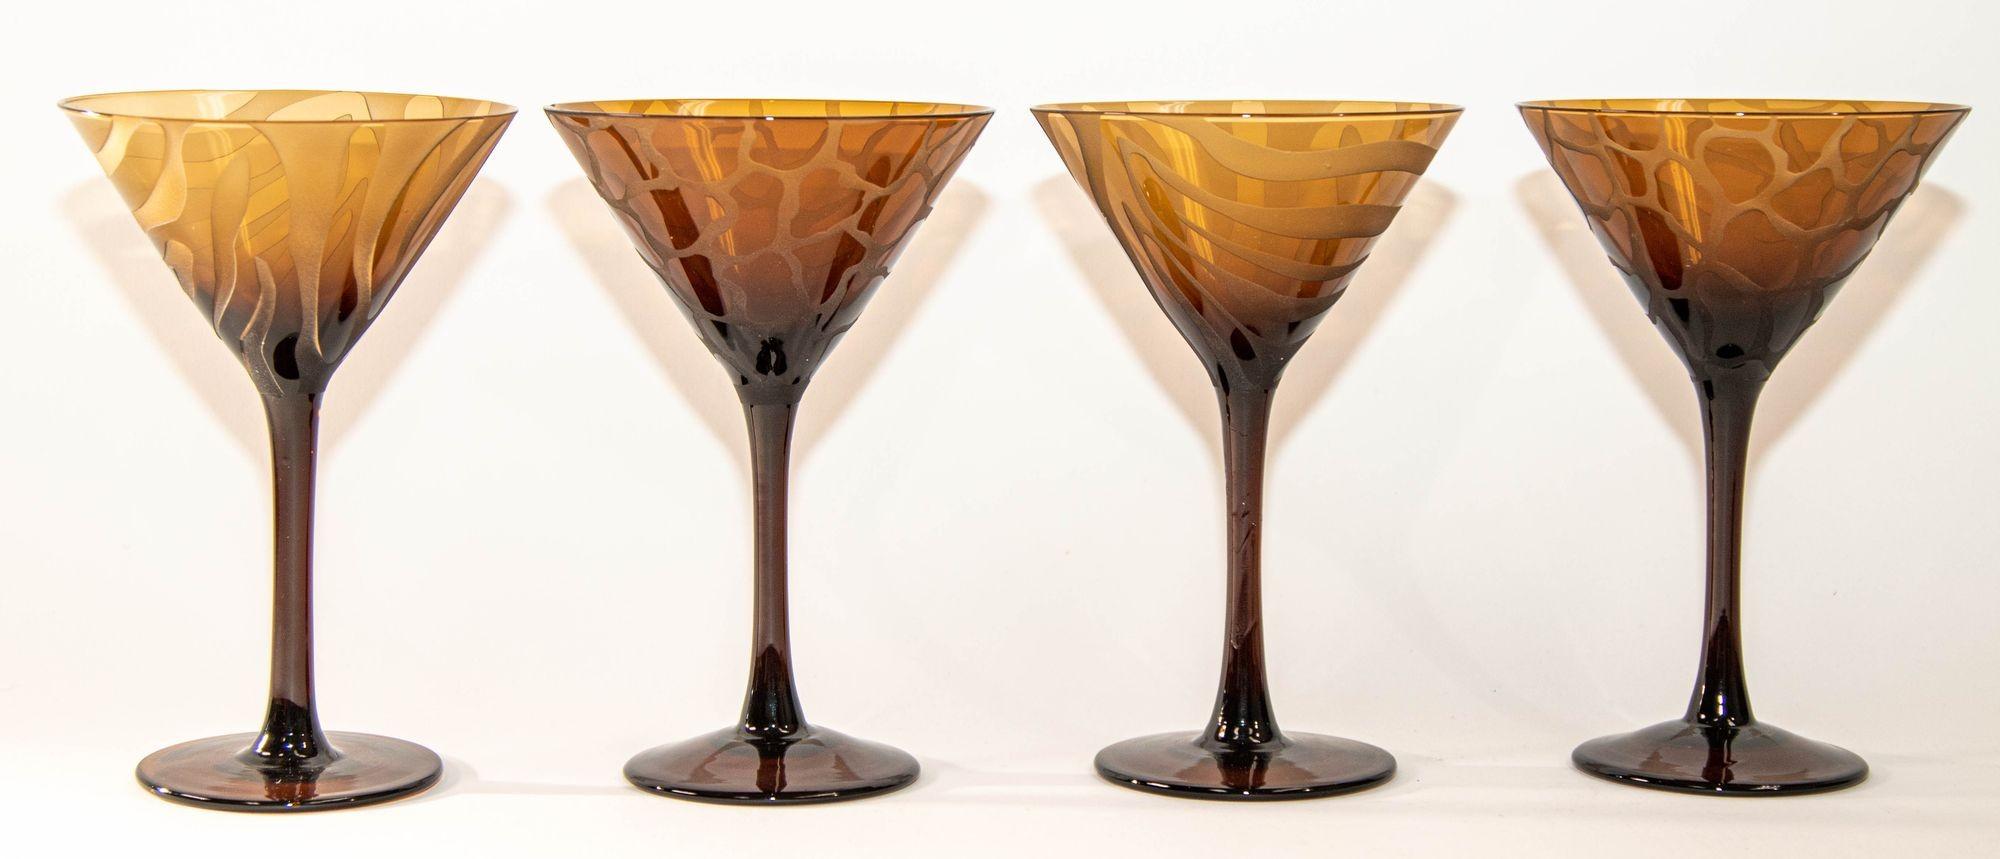 1990s Murano etched glass Martini Stemmed Glasses.
This is an amazing set of 4 exotic Martini Glasses, Tortoise, Animal Print Barware.
Set of four martini glasses features burnt amber bowls and stems.
These splendid late 20th century glasses are